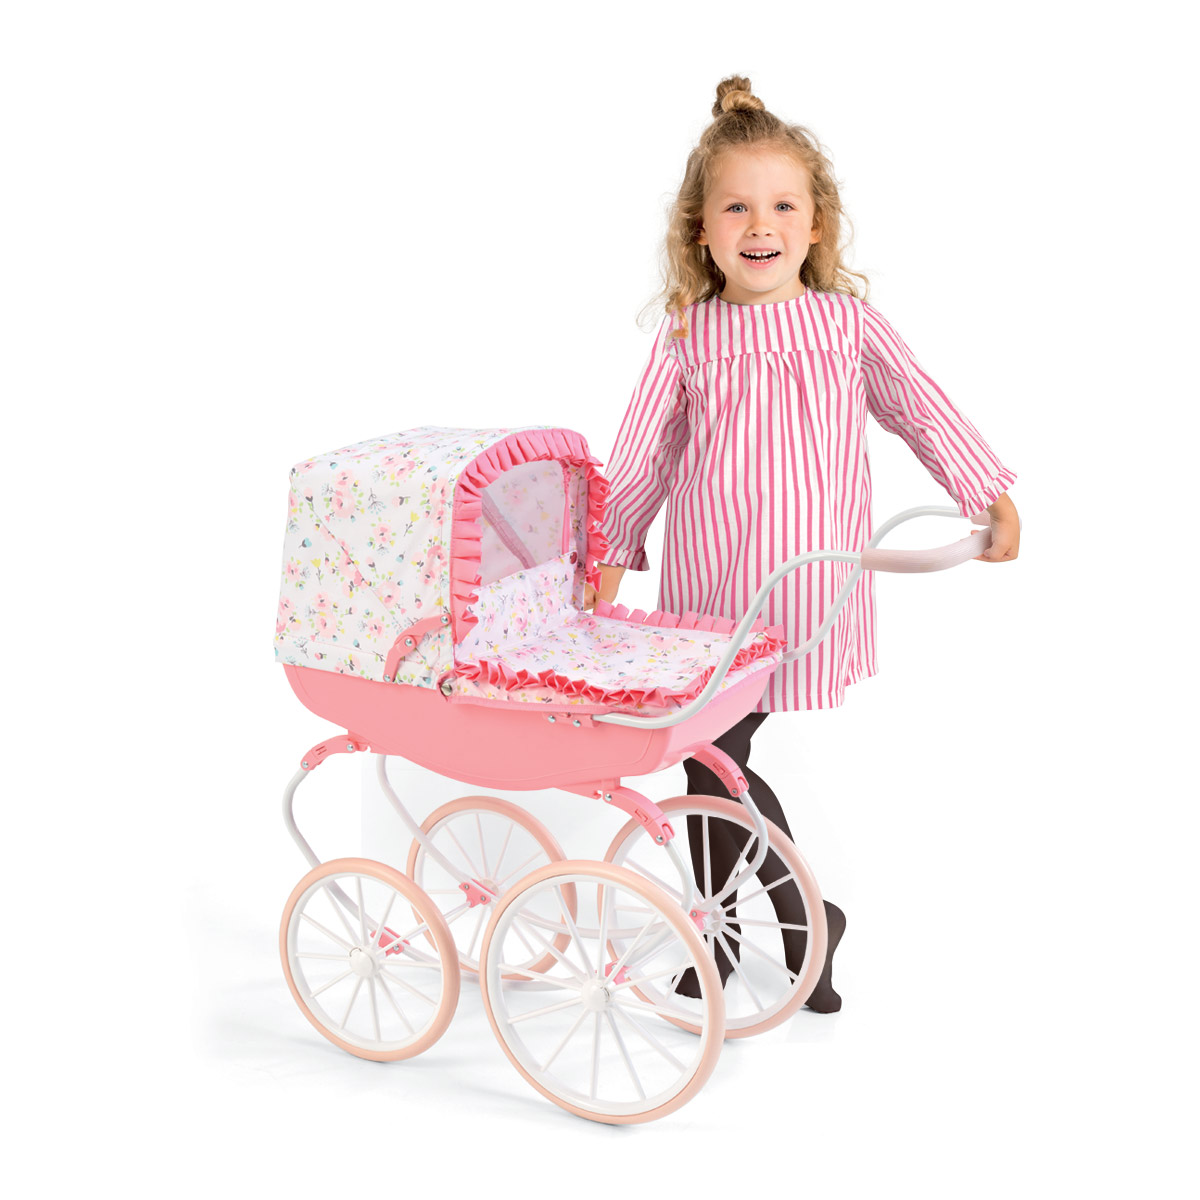 Cupcake Detailed Carriage Pram | Early Learning Centre